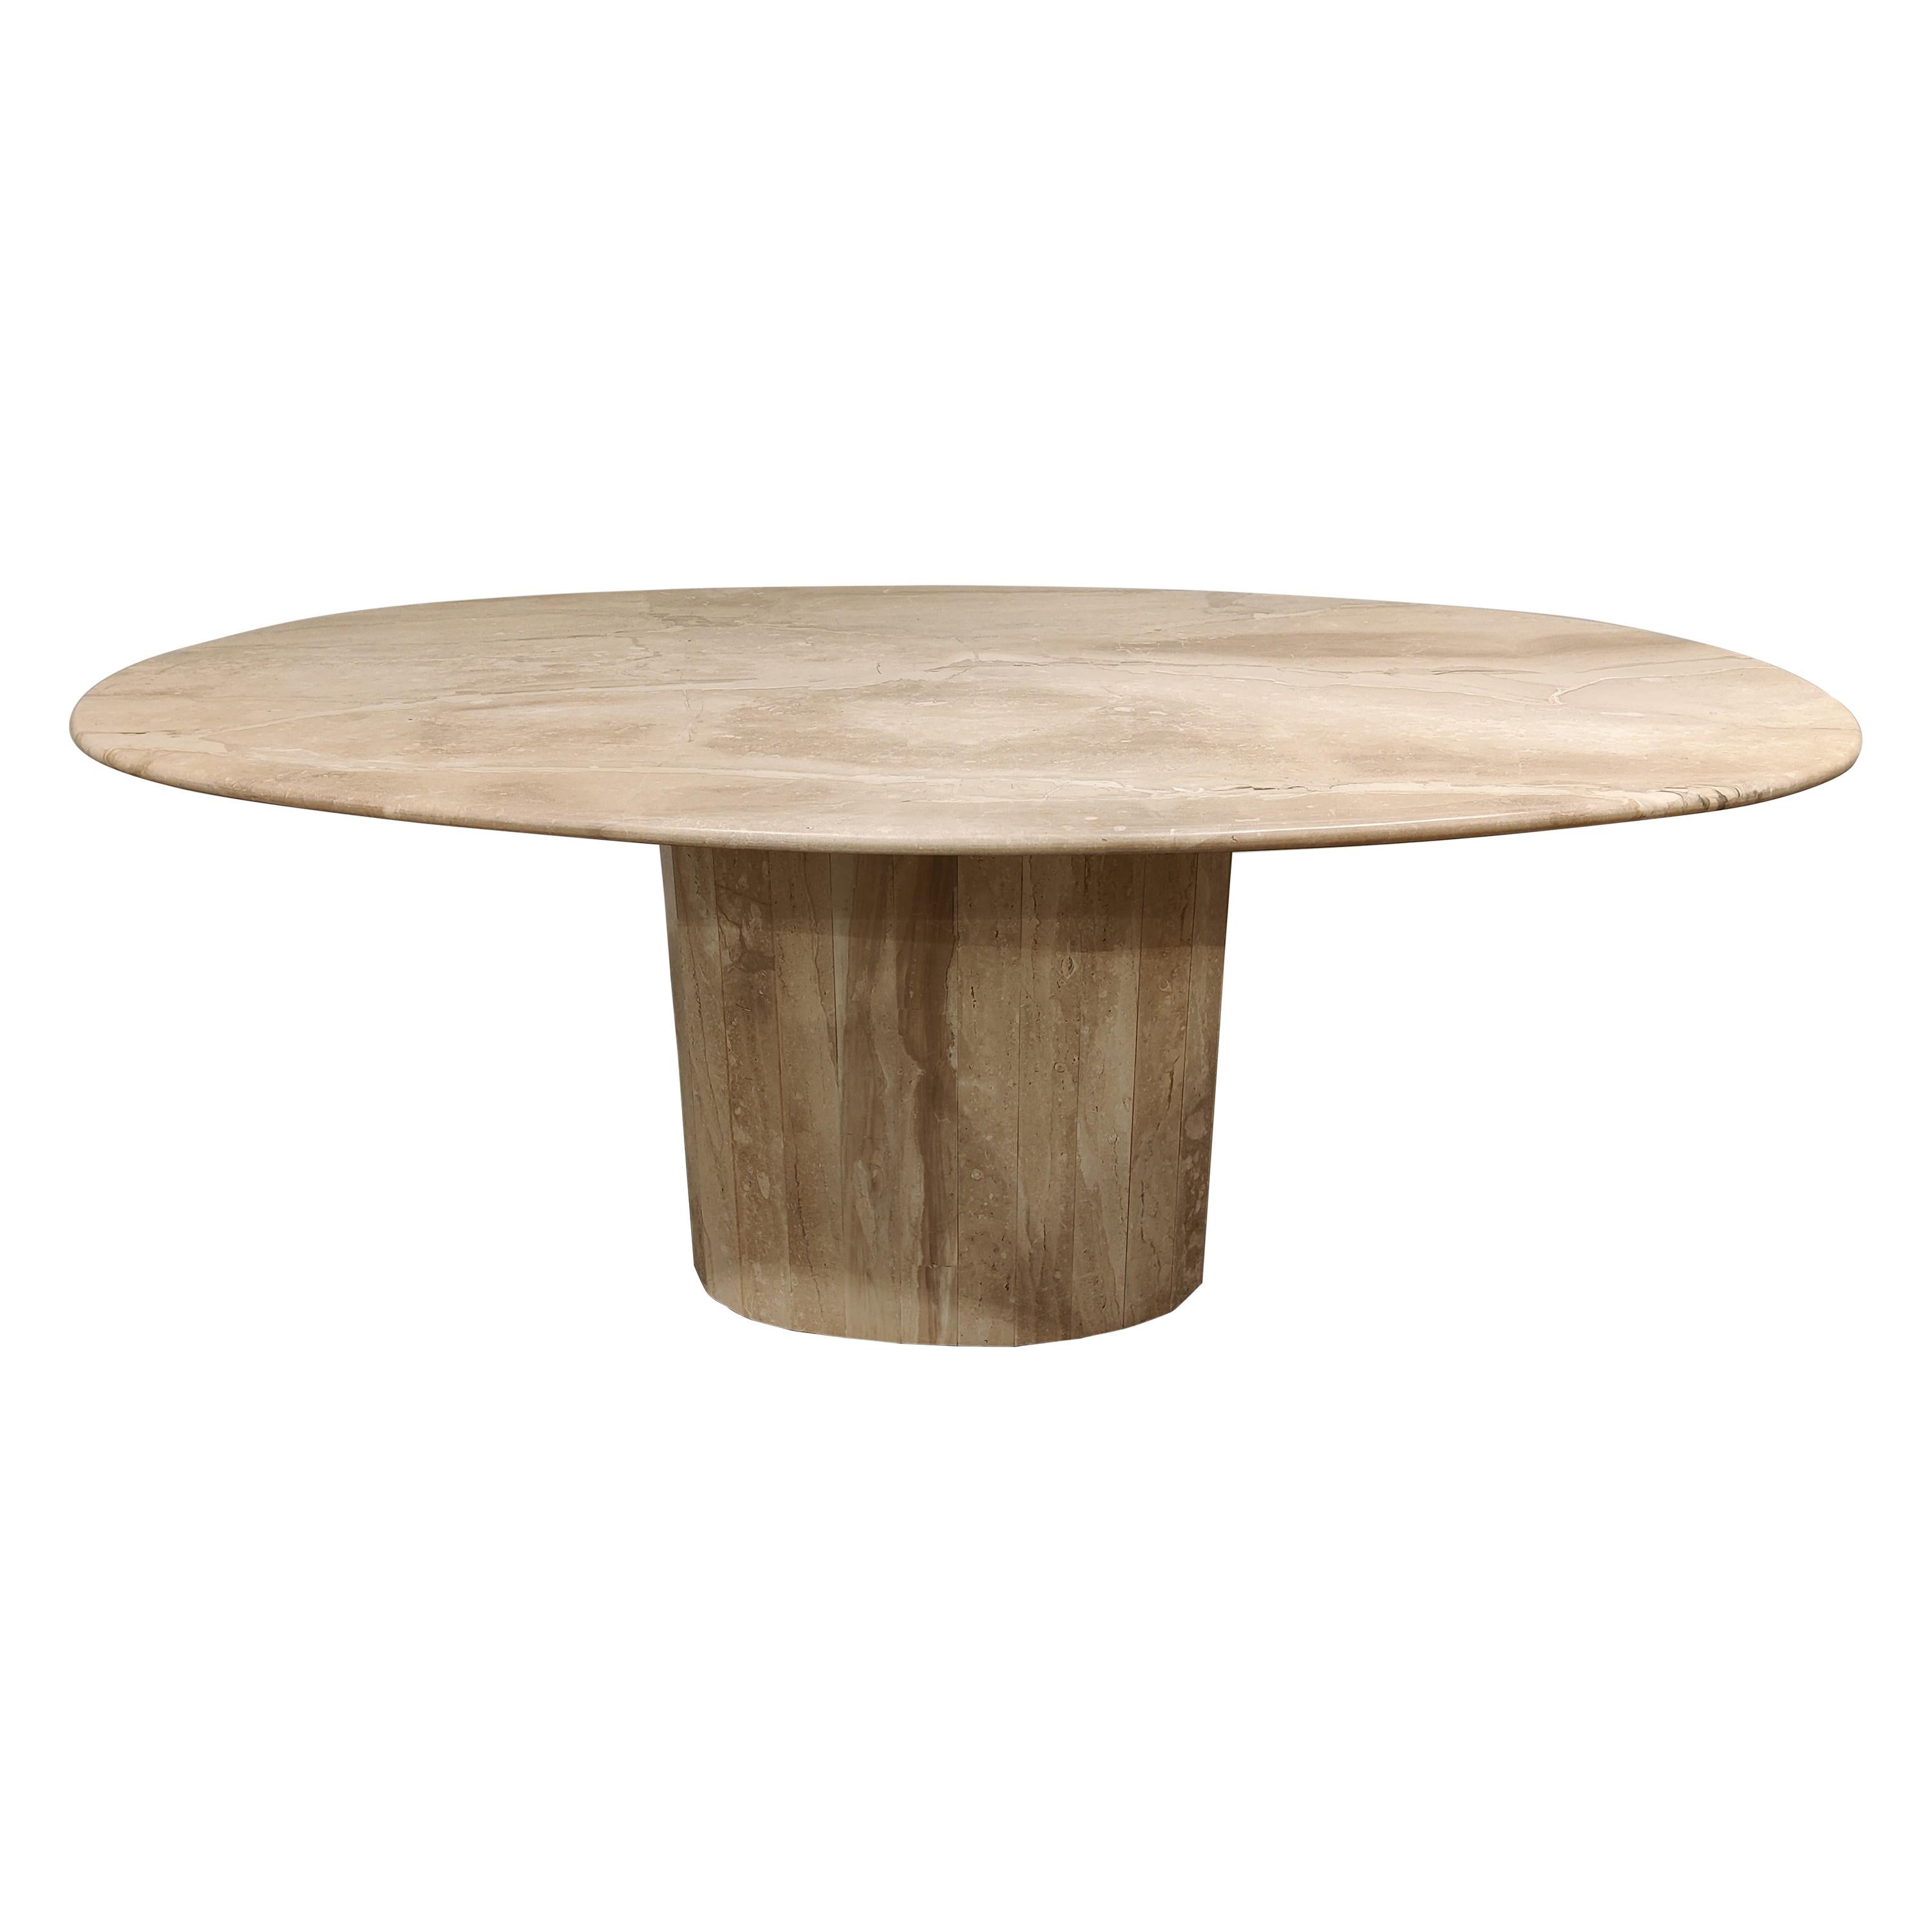 Vintage Oval Travertine Dining Table, 1970s at 1stDibs